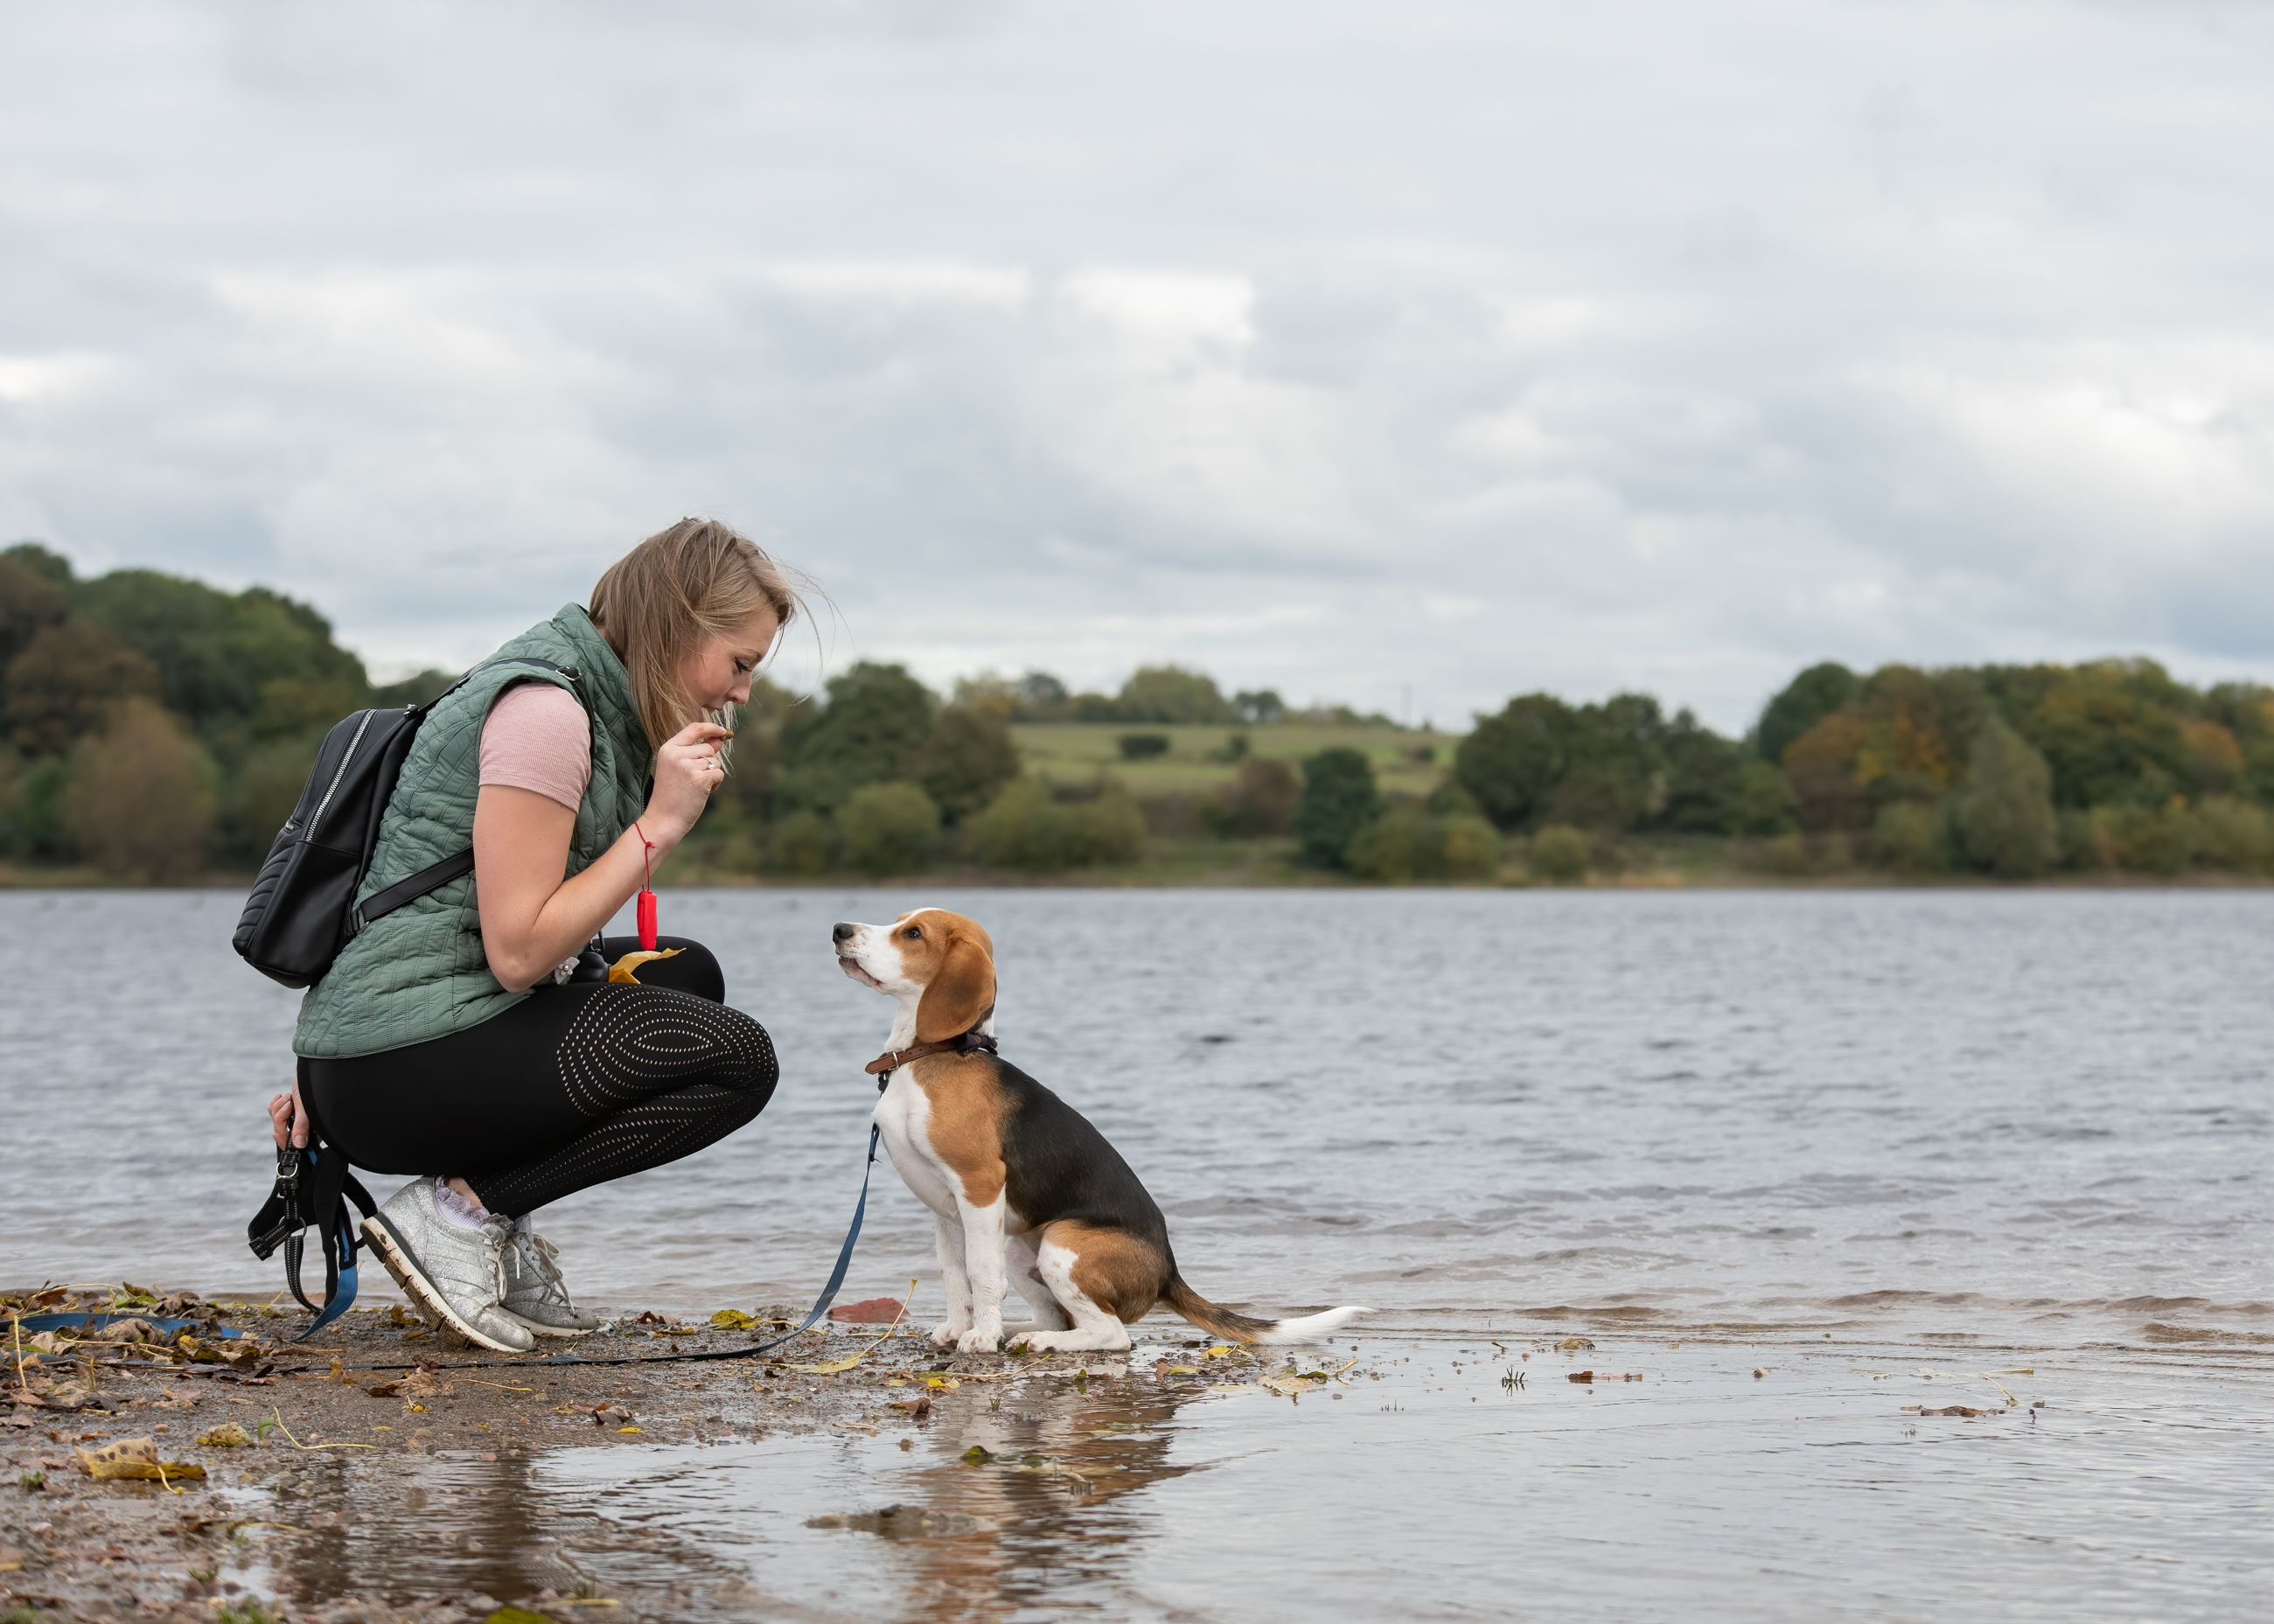 A beagle and owner at the edge of a lake